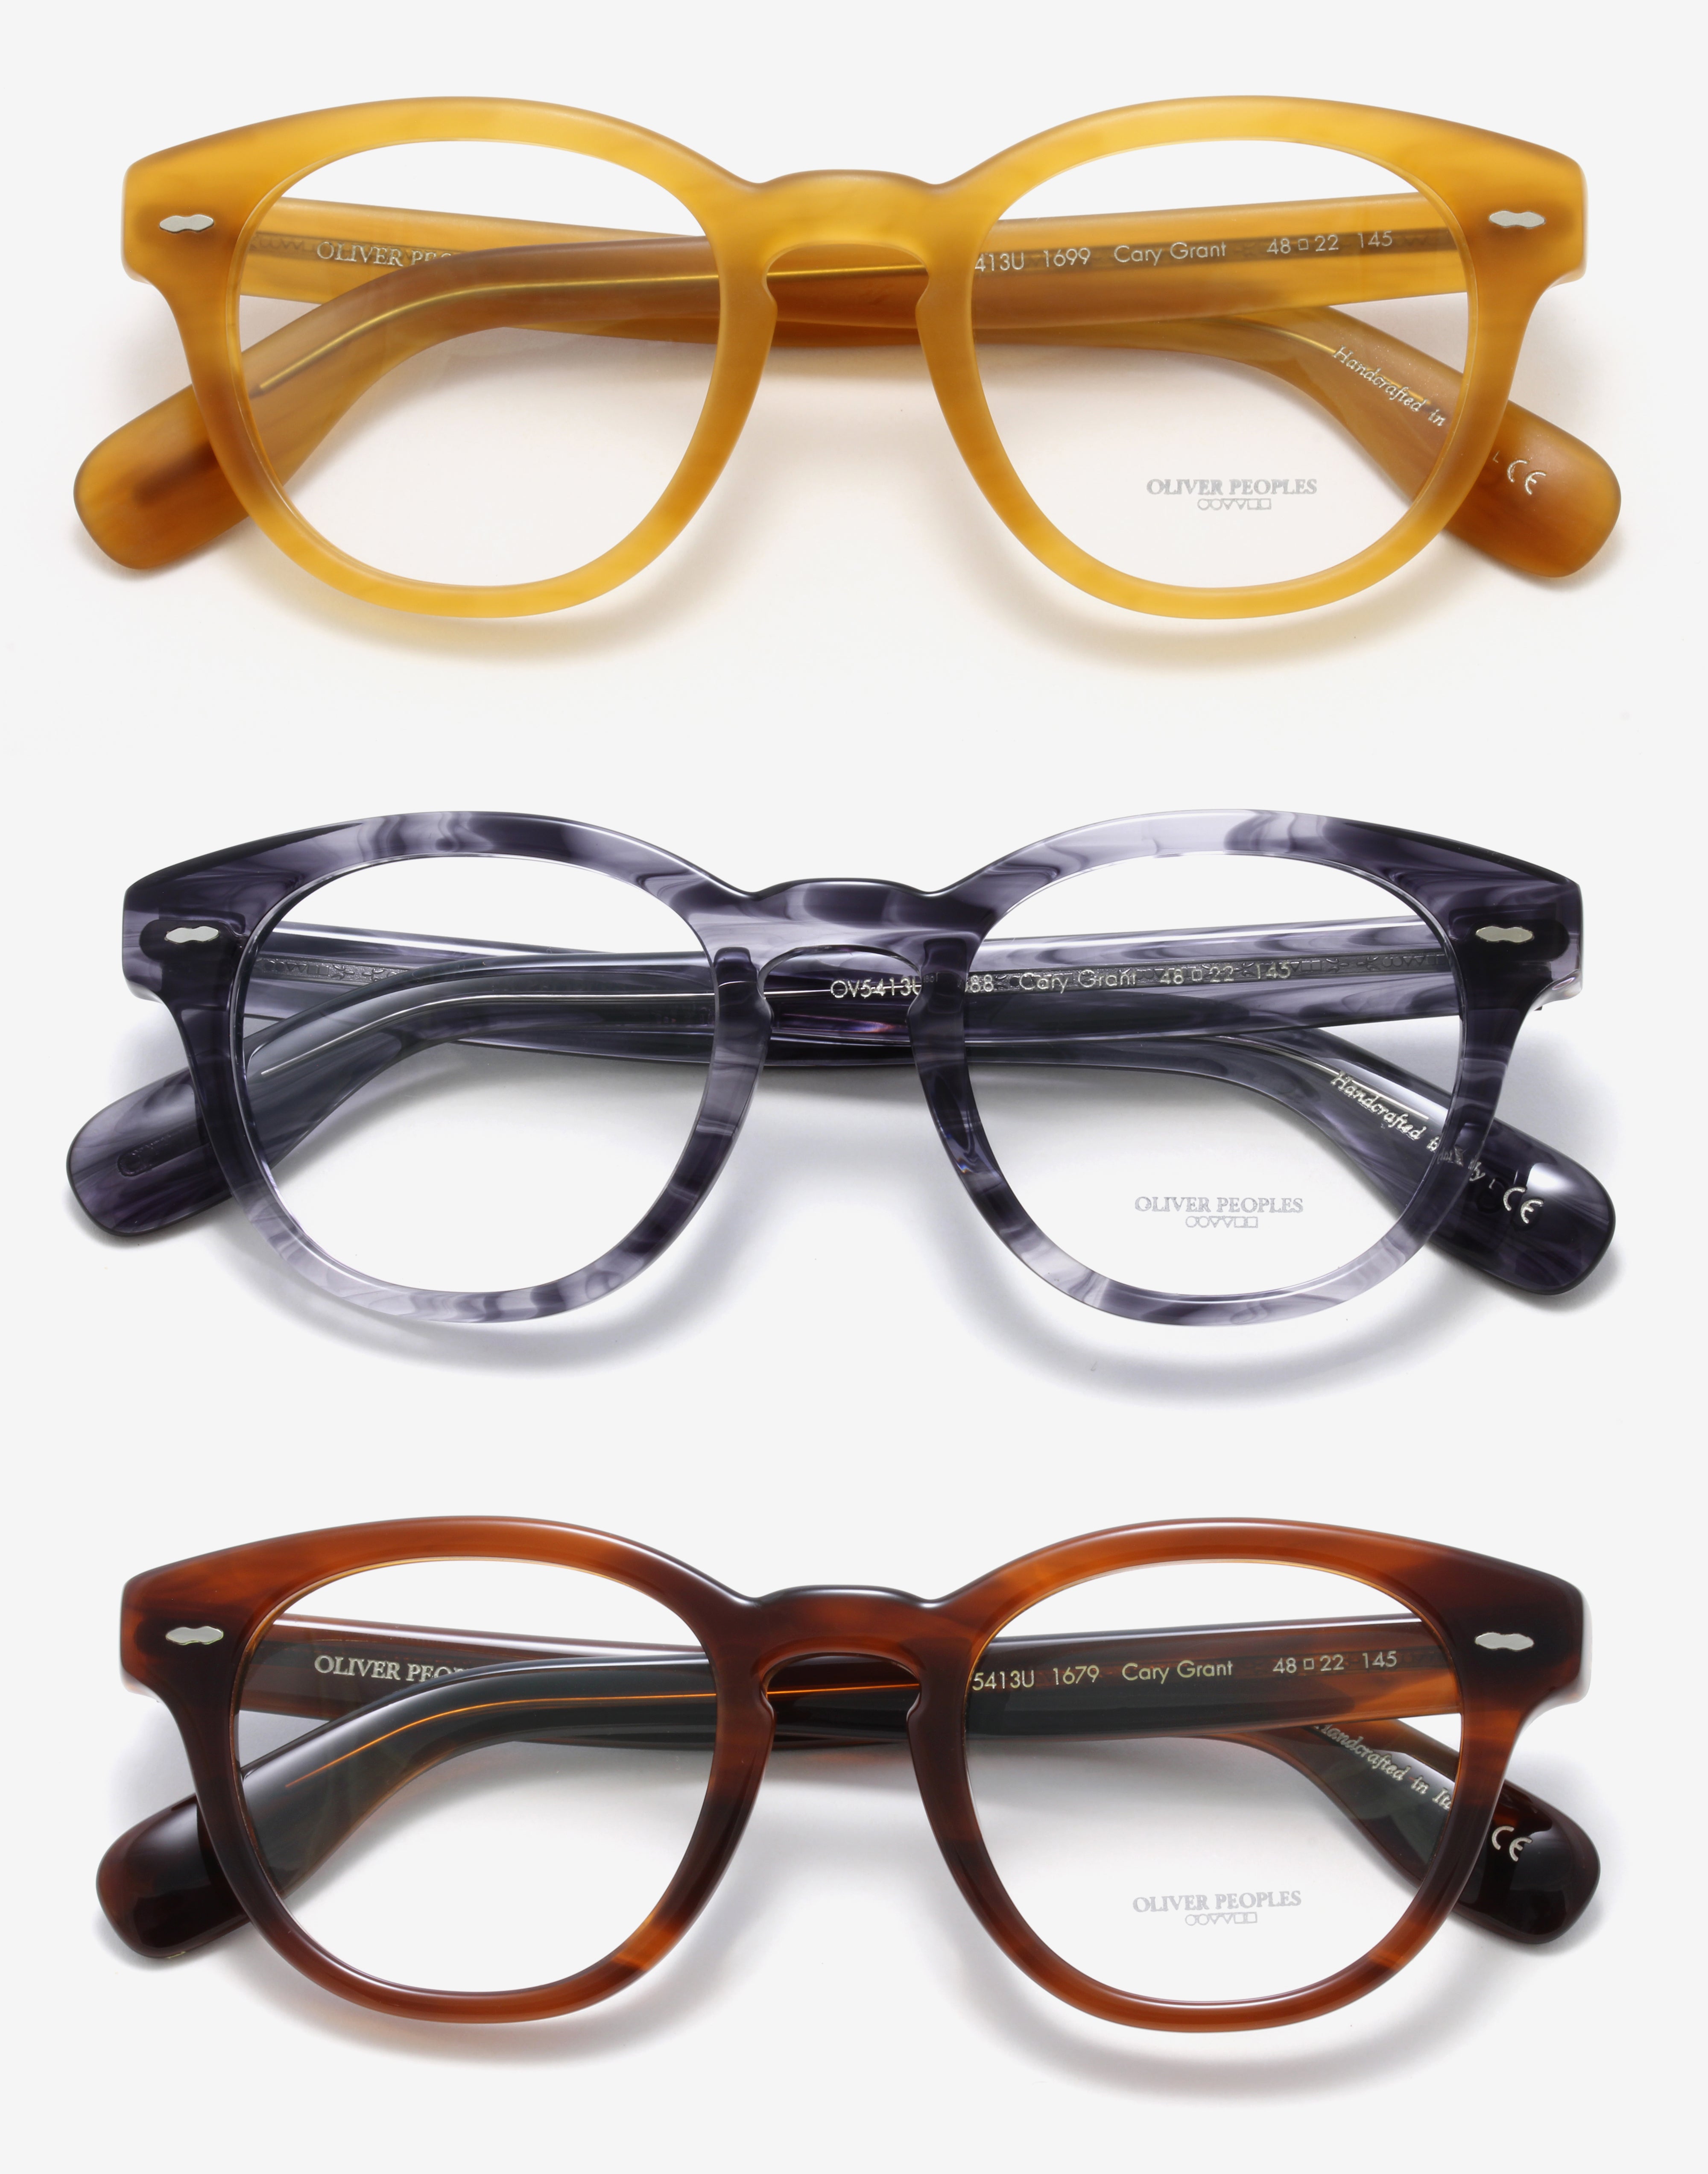 Oliver Peoples | A Closer Look